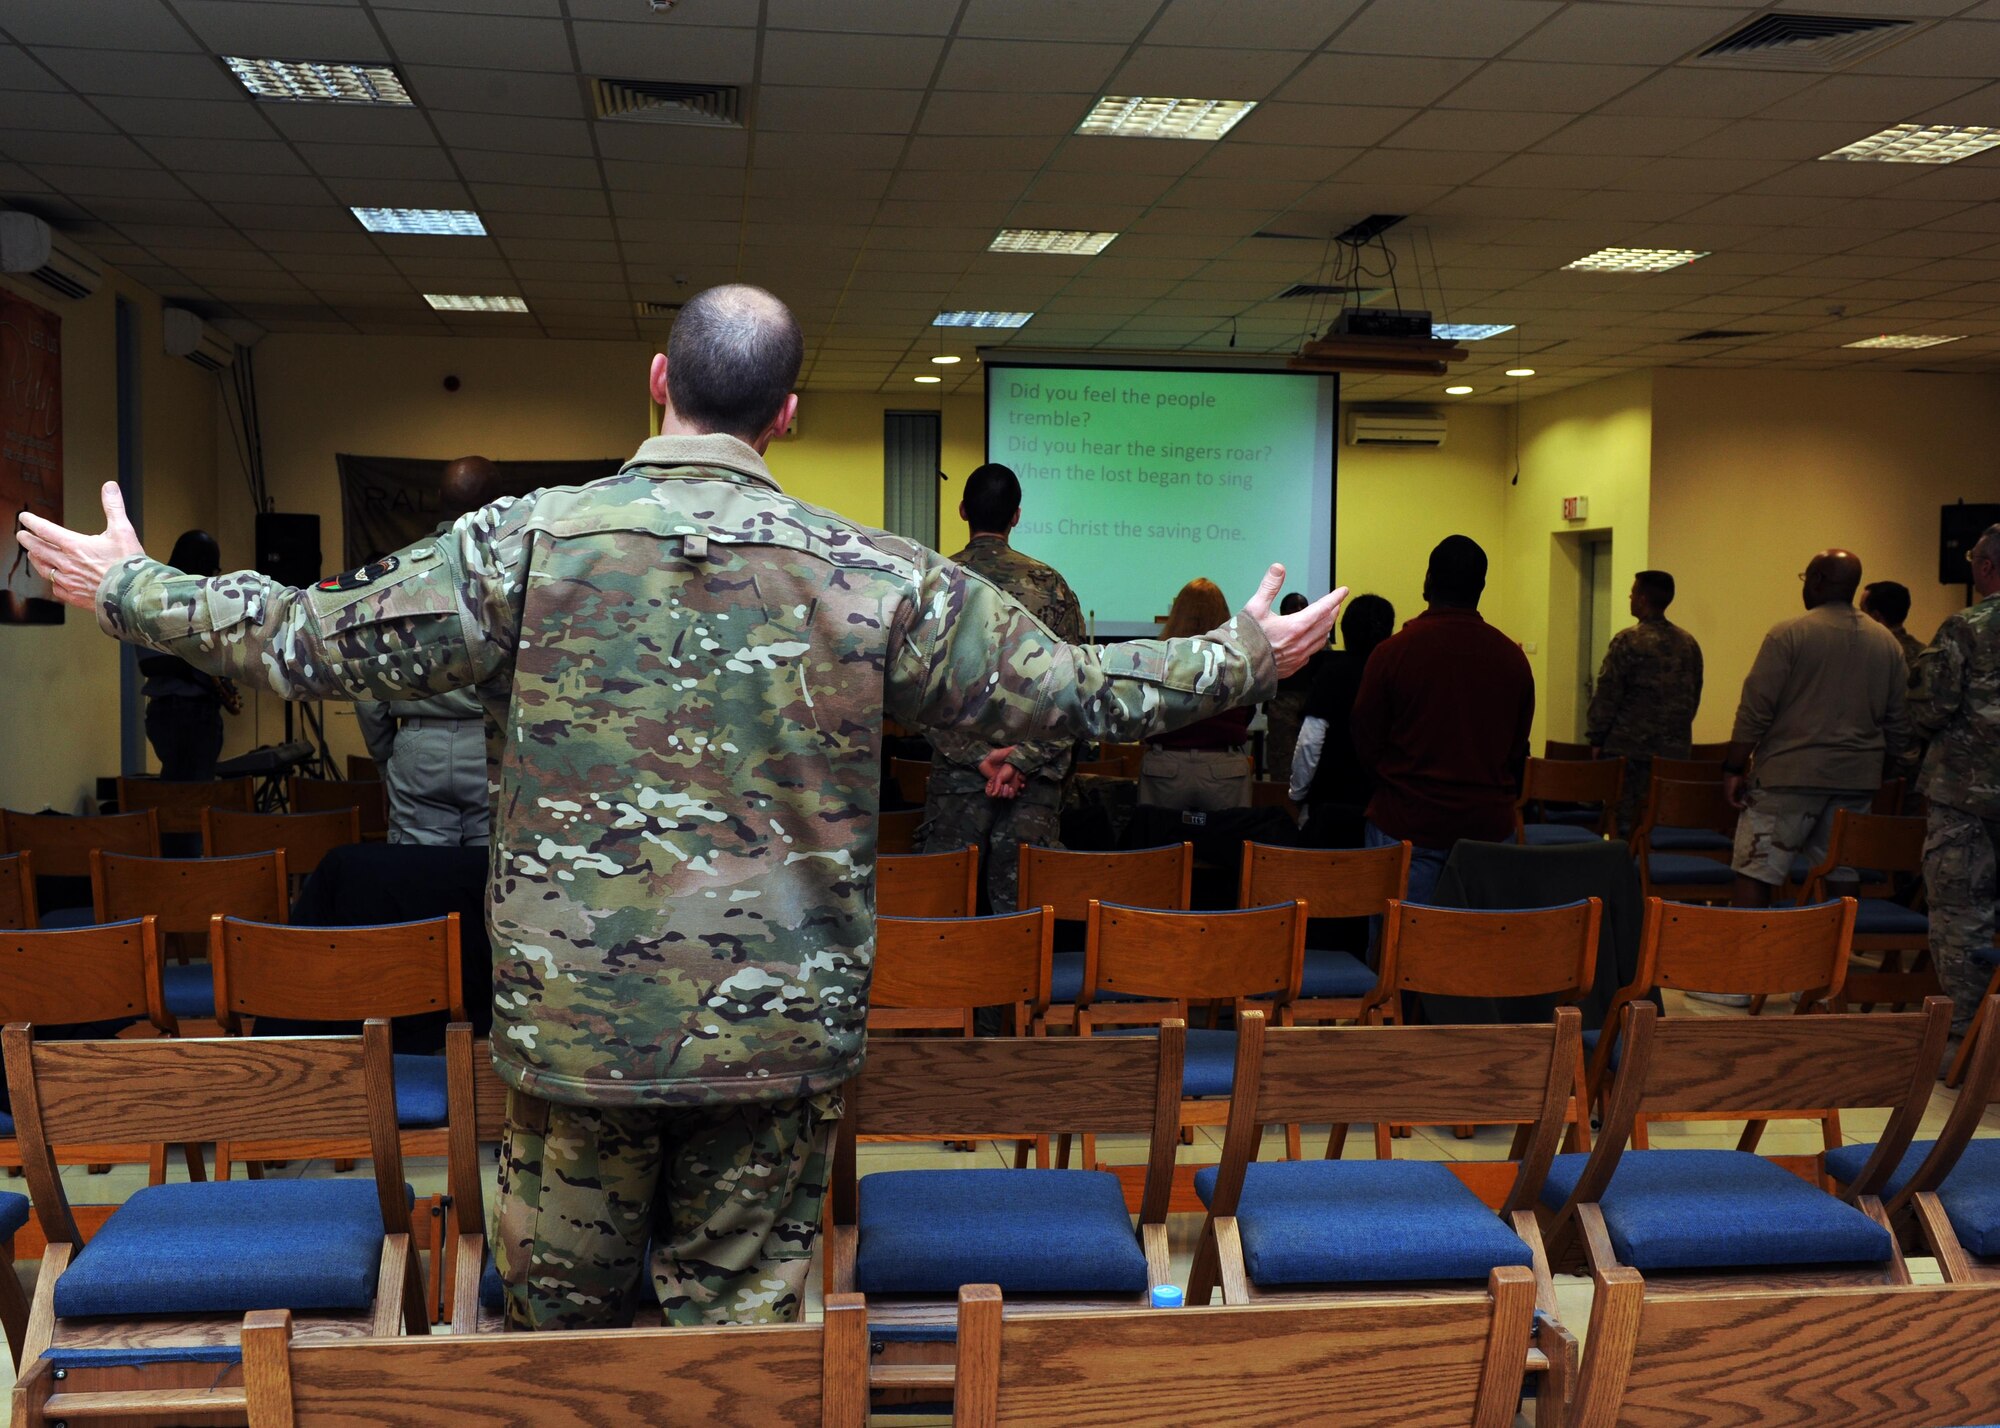 A U.S. Air Force Airman raises his hands during the praise and worship portion of an evening church service conducted by U.S. Air Force Maj. William Braswell, 455th Air Expeditionary Wing chaplain, Feb. 15, 2015 at Hamid Karzai International Airport in Kabul. Braswell, accompanied by U.S. Air Force Tech. Sgt. Aleric Hebert, 455 AEW chaplain assistant, travels throughout the U.S. Air Force Central Command Area of Responsibility engaging with Airmen and conducting church services to ensure deployed servicemembers are spiritually fit to fight.(U.S. Air Force photo by Staff Sgt. Whitney Amstutz/released)